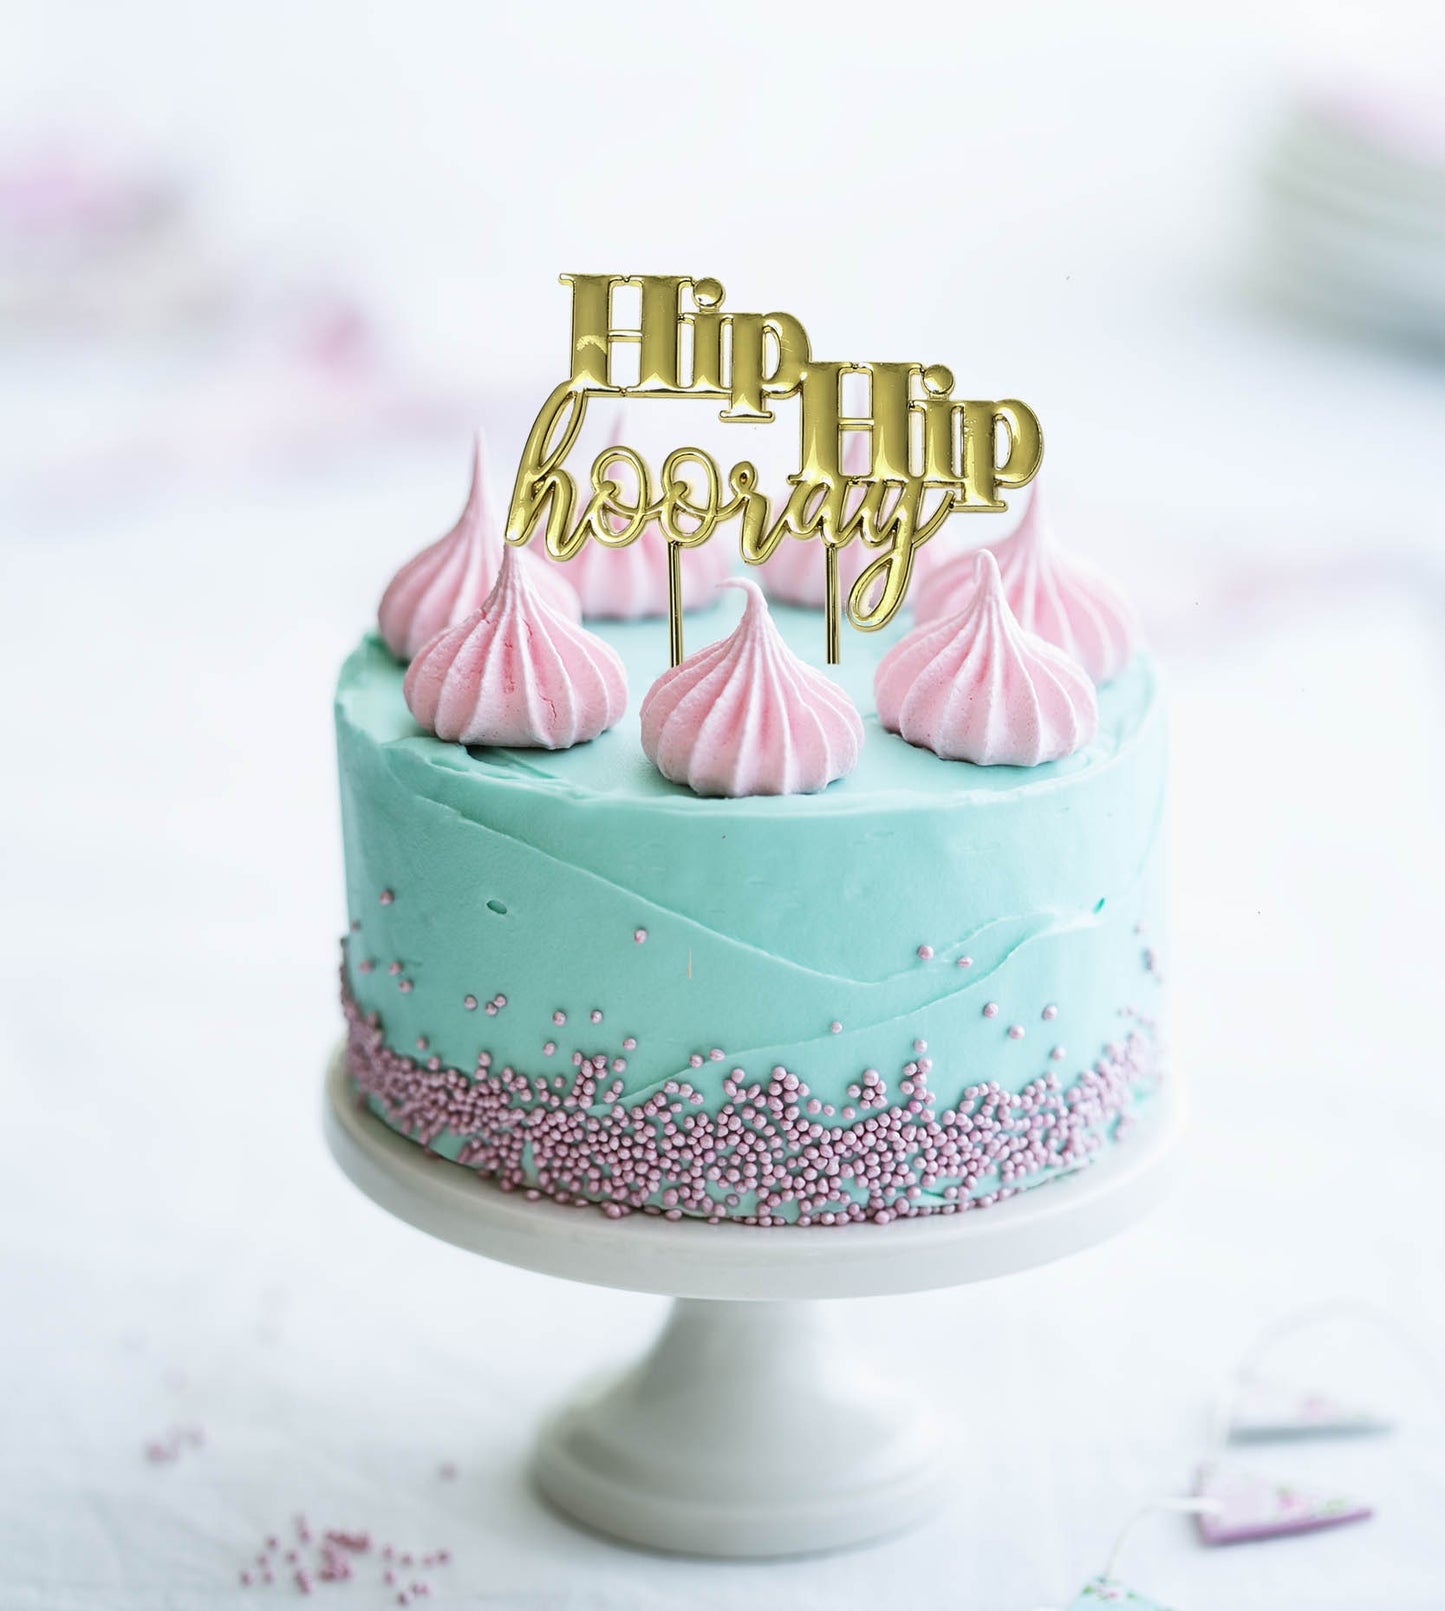 GOLD PLATED CAKE TOPPER - HIP HIP HOORAY GOLD TOPPER